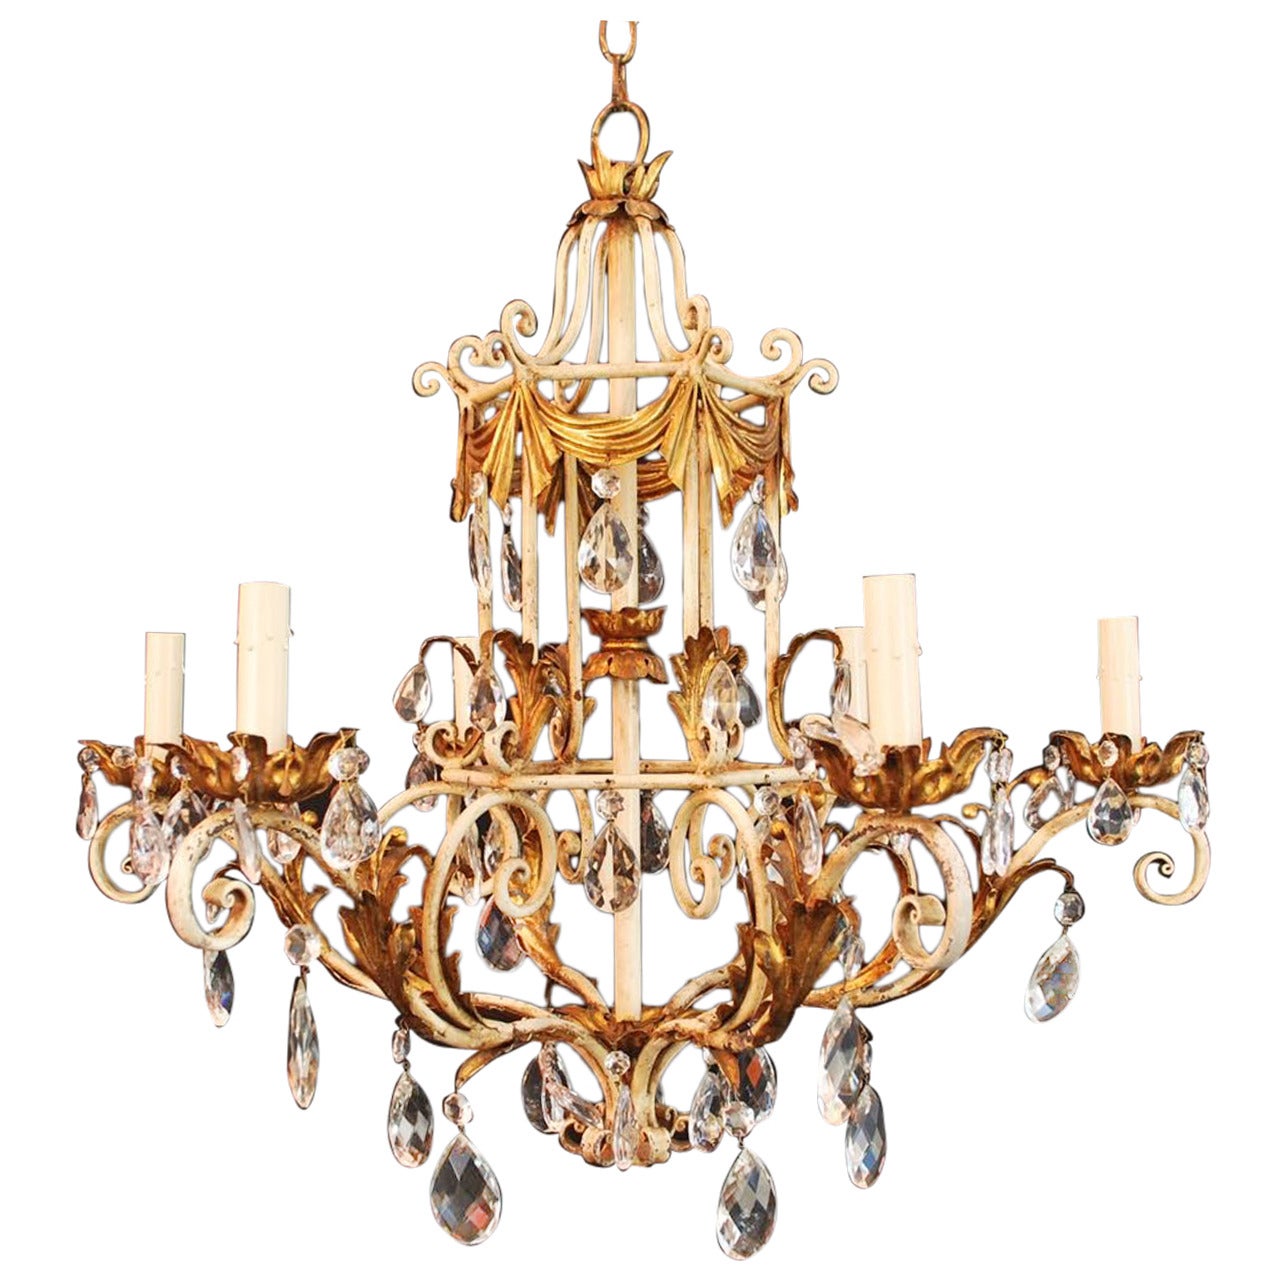 1950 Italian Wrought Iron and Crystal Chandelier For Sale